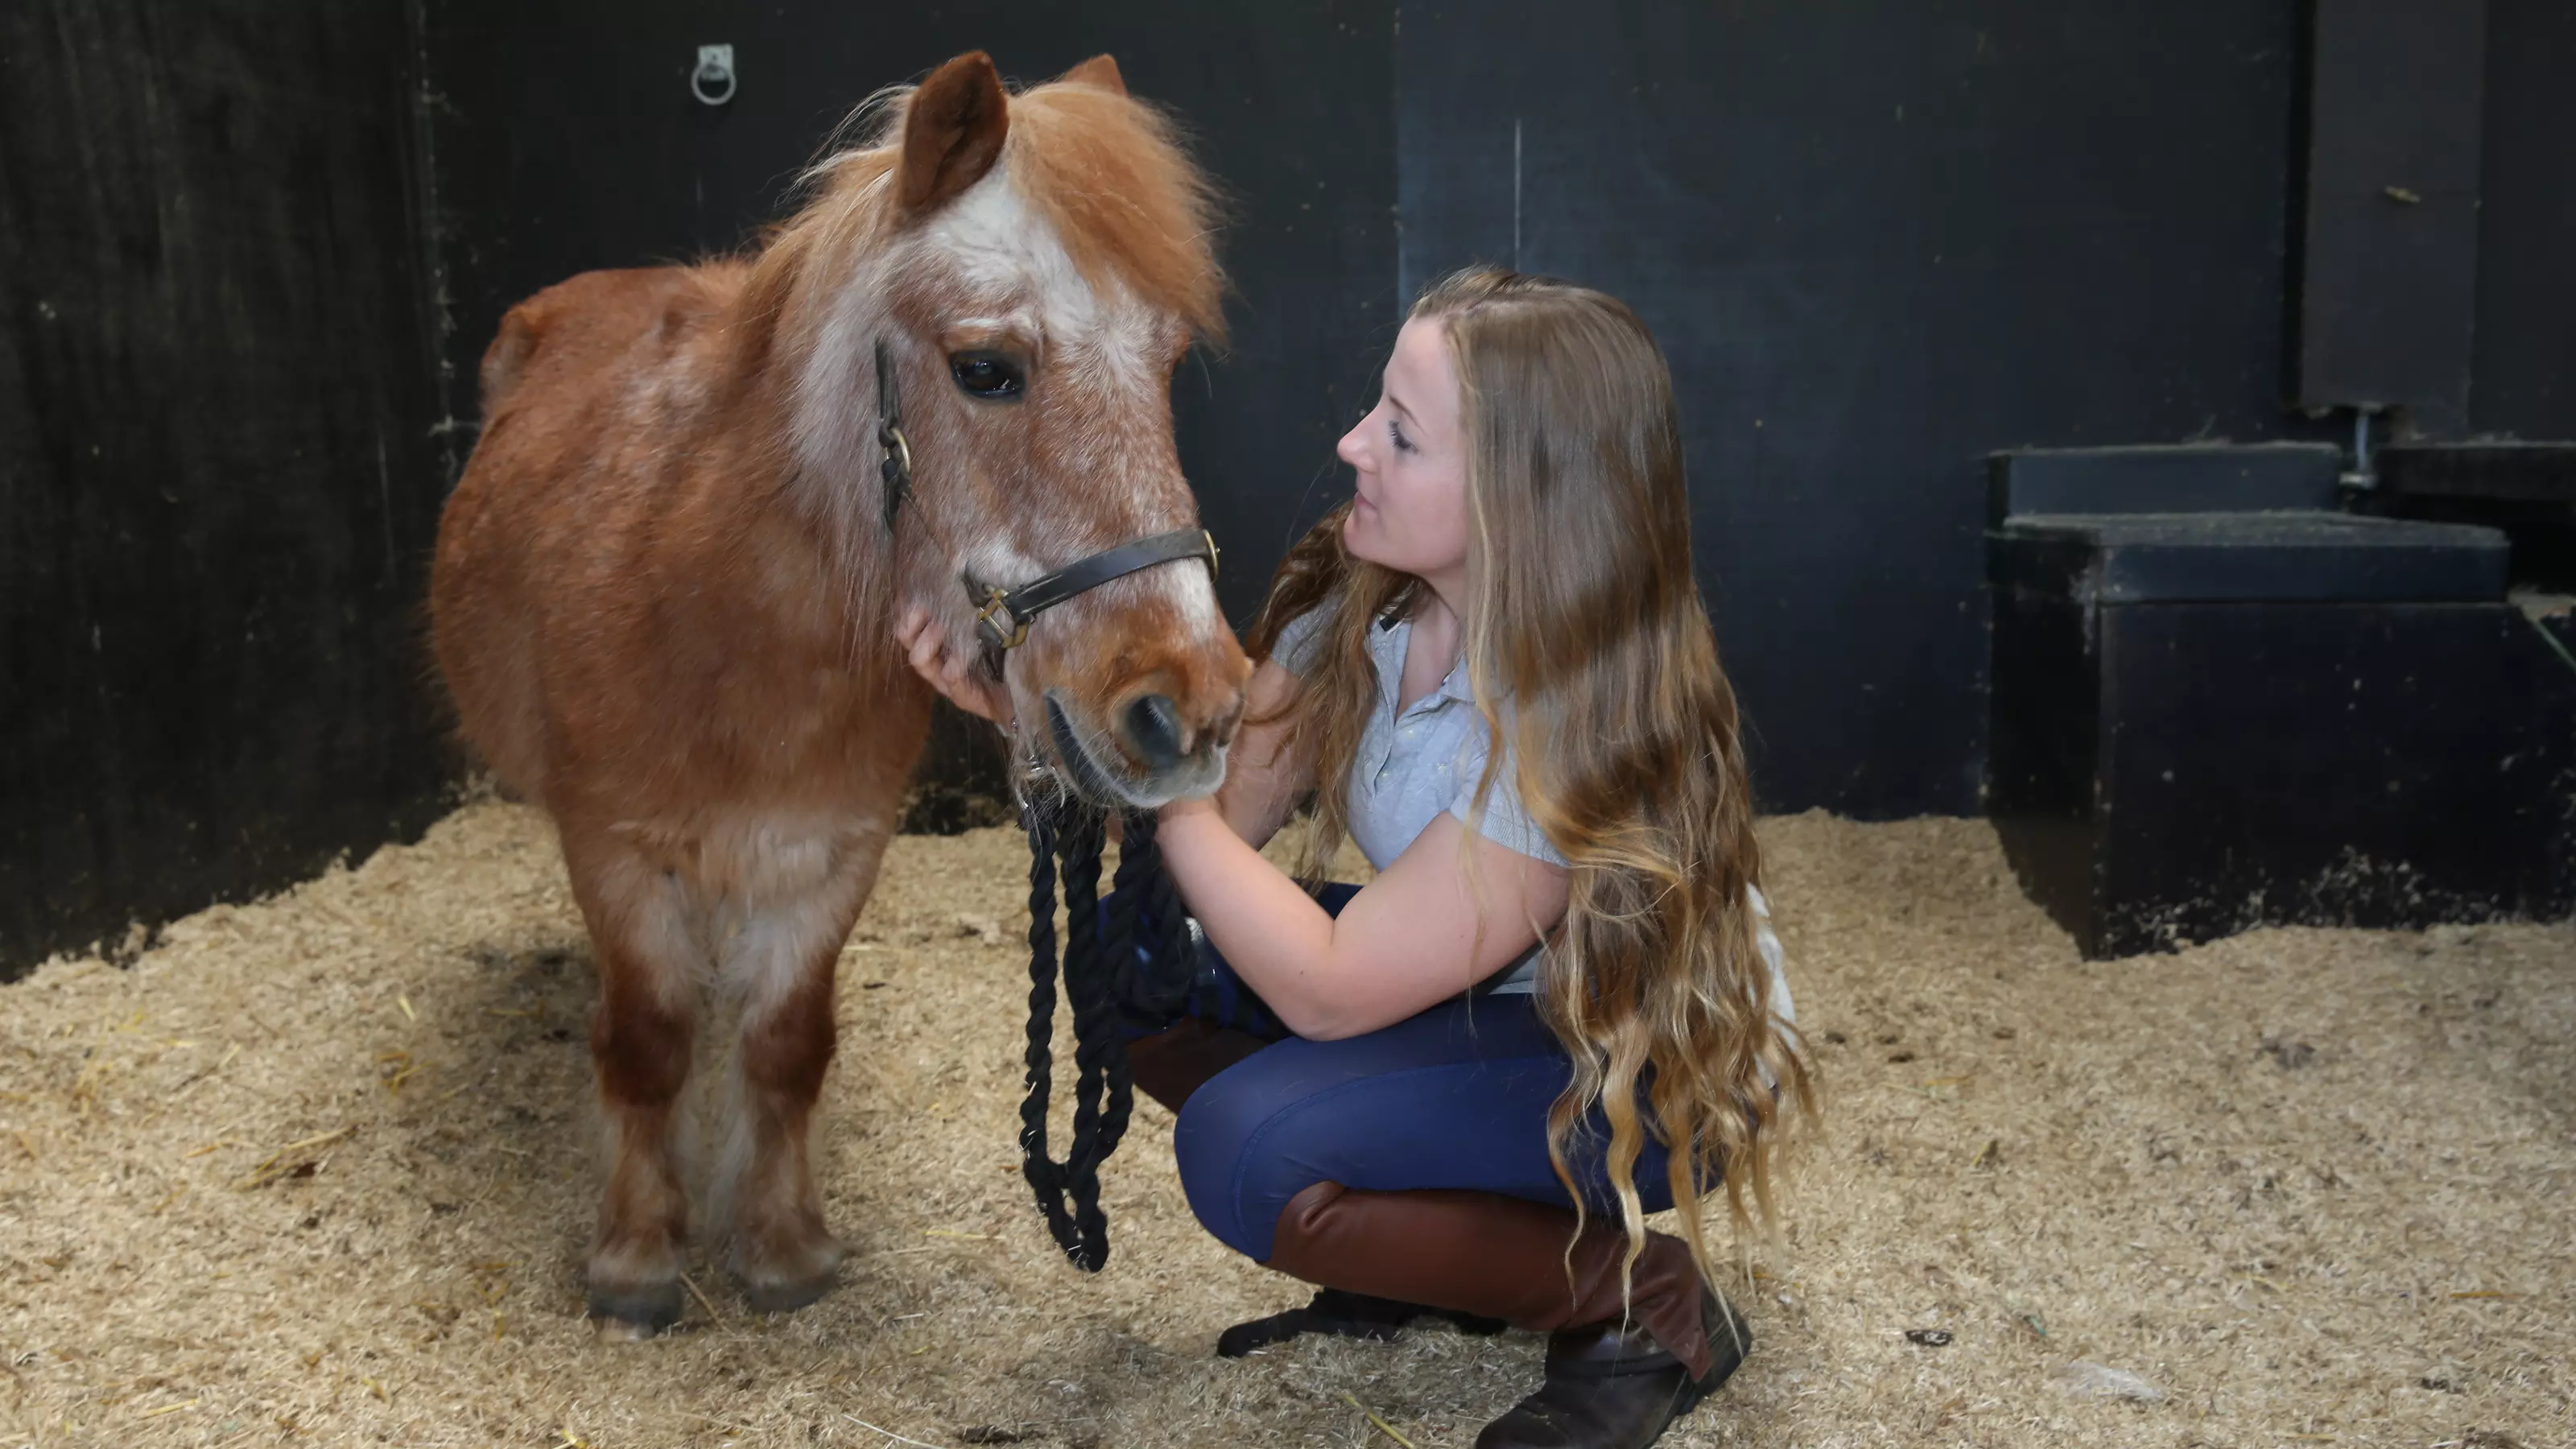 A woman with long hair crouches down next to a chestnut and white Shetland pony. She holds the pony's headcollar with one hand and gently strokes his chin with her other hand.